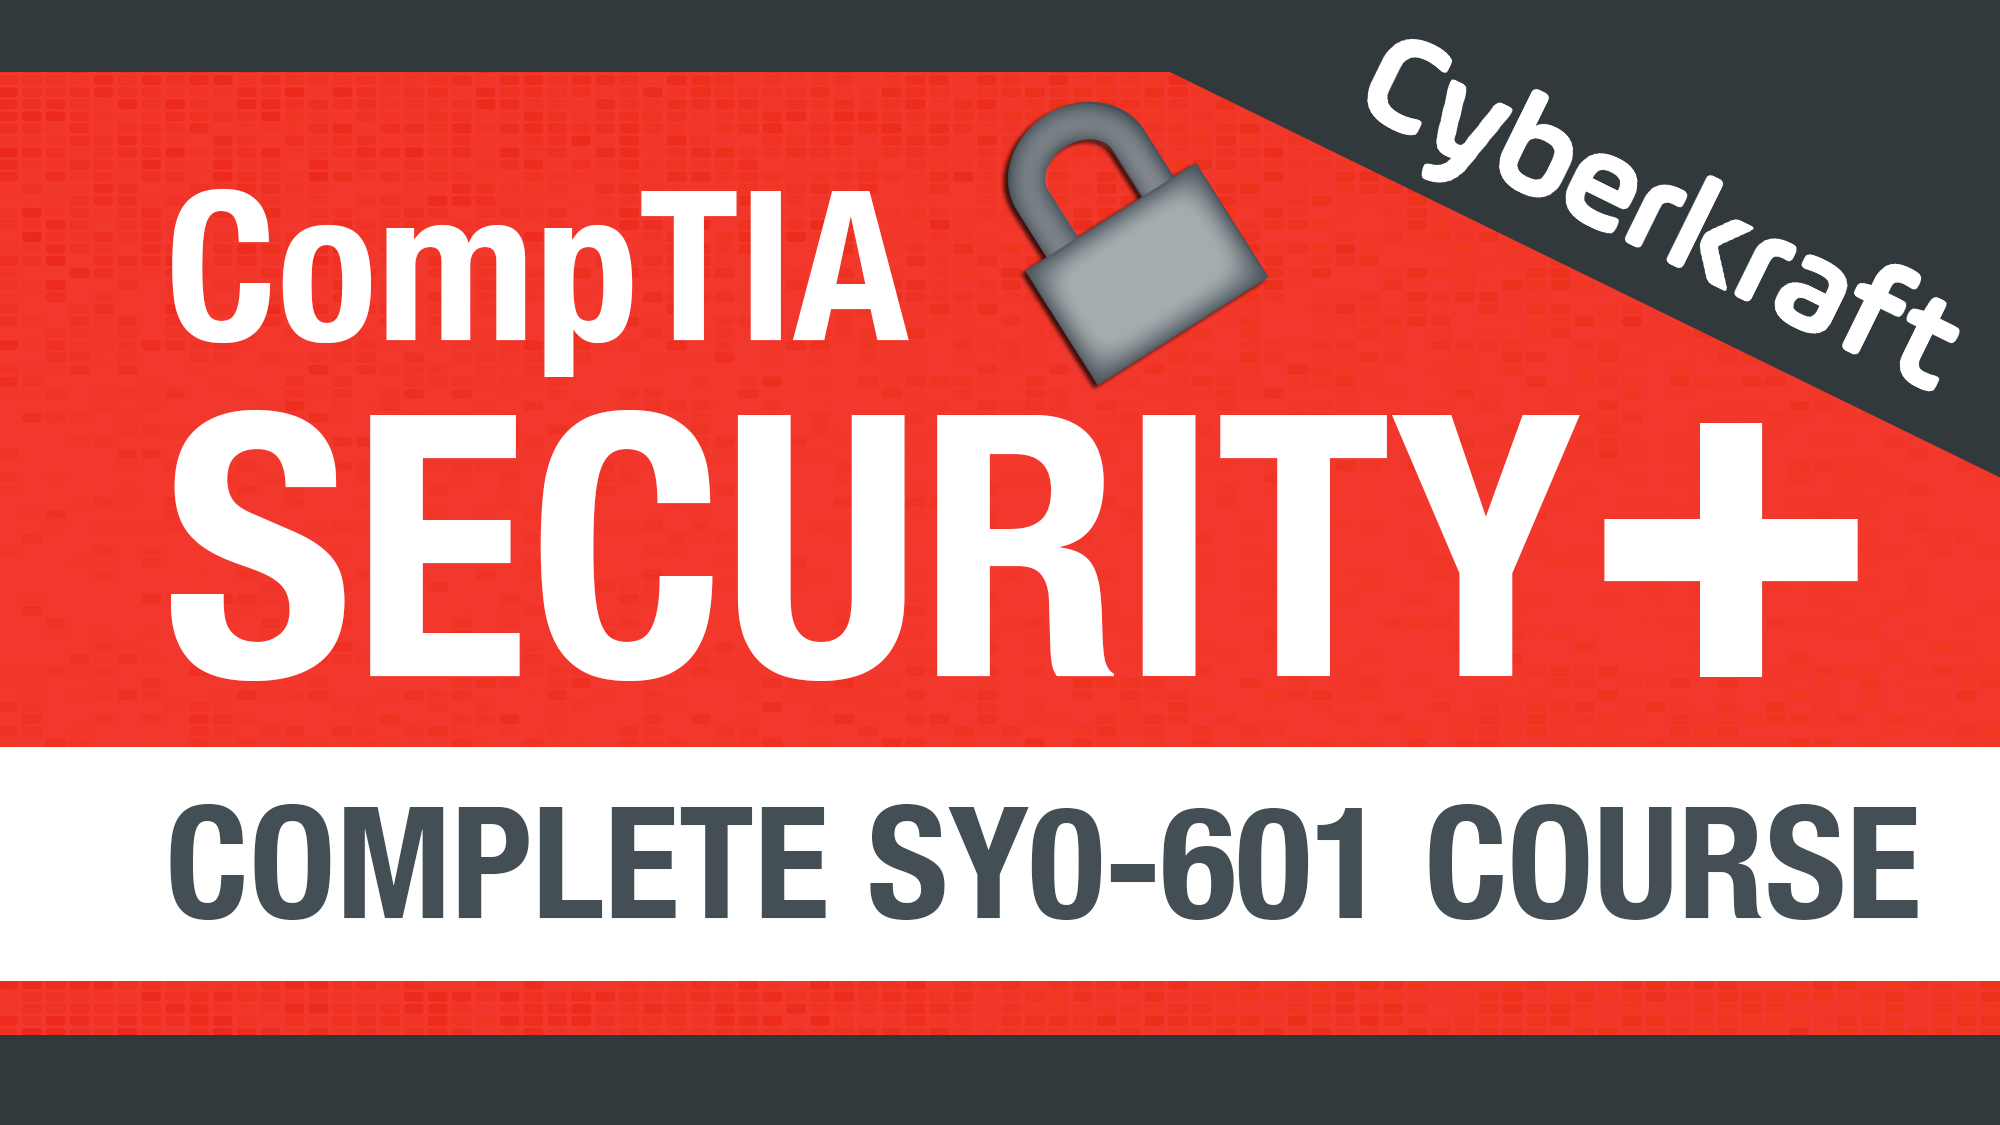 CompTIA Security+ Complete SY0-601 Course